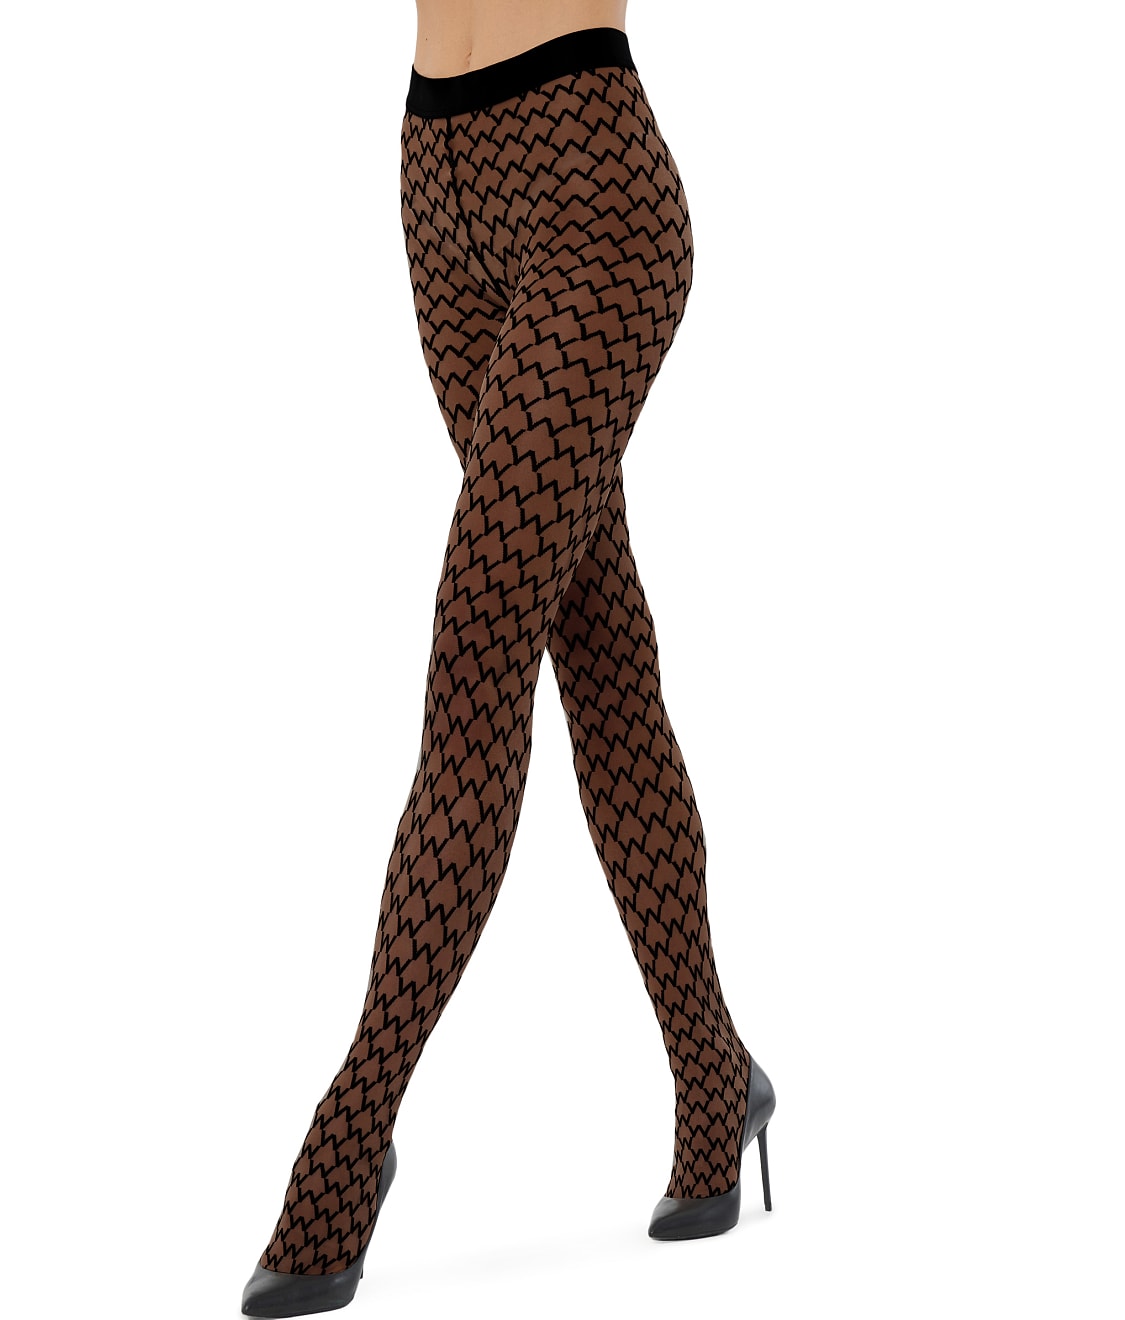 Wolford: Sheer W Tights 149-72